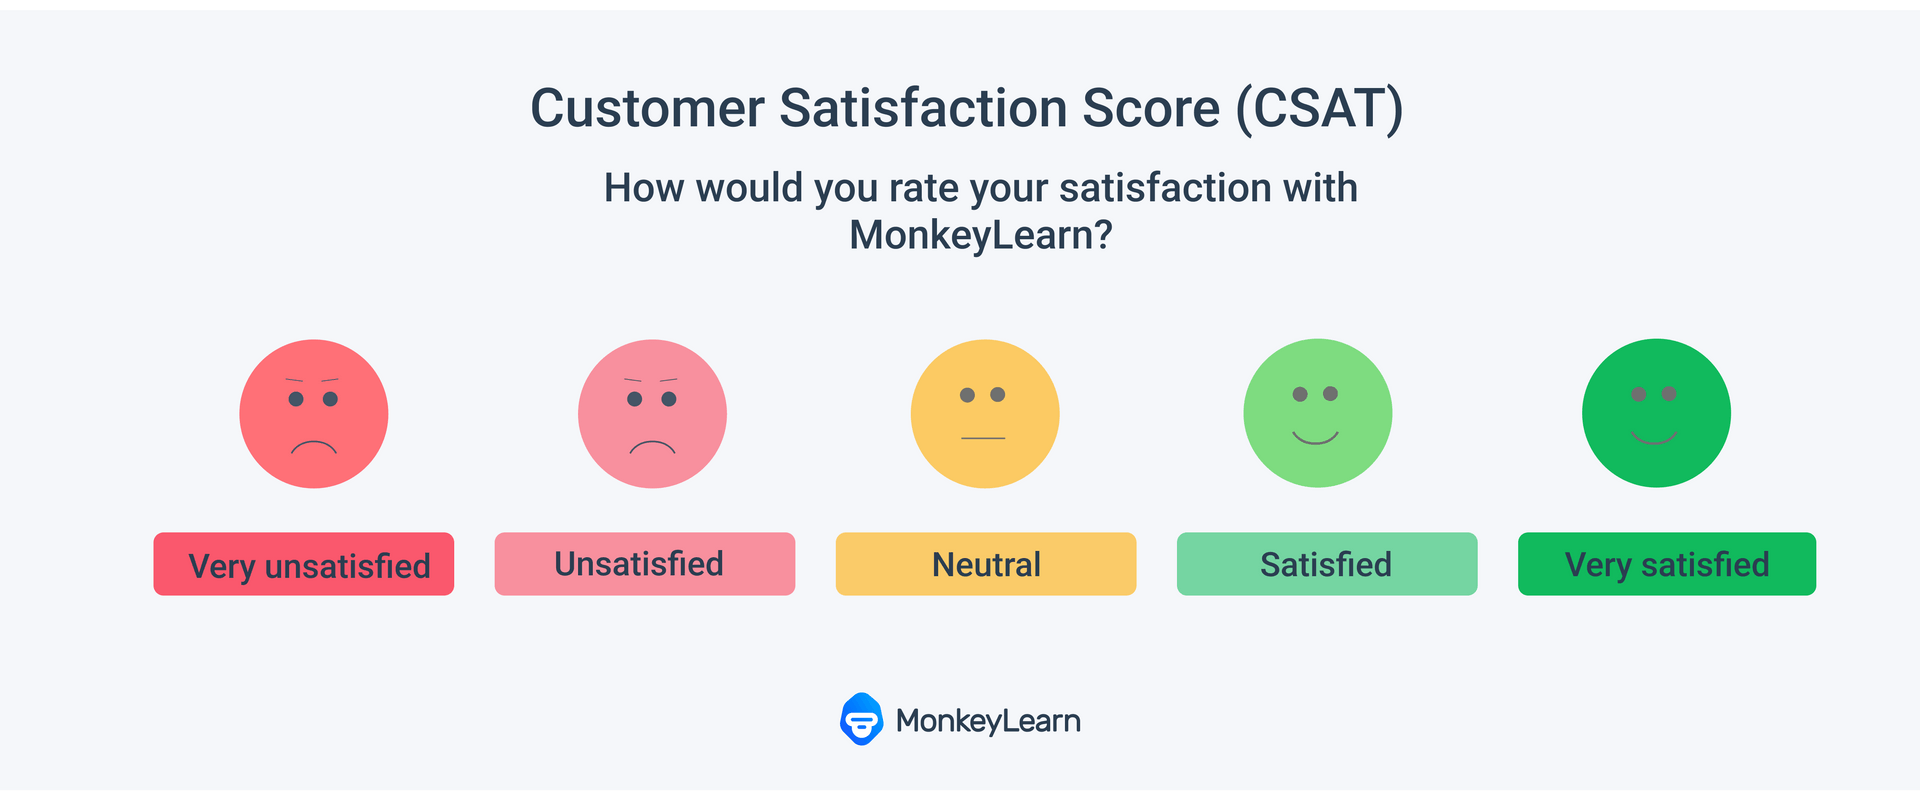 CSAT example of question and predetermined responses: How would you rate your satisfaction with MonkeyLearn?
Very unsatisfied (with unhappy red face)
Unsatisfied (with unhappy red face)
Neutral (with neutral yellow face)
Satisfied (with happy green face)
Very satisfied (with unhappy green face)